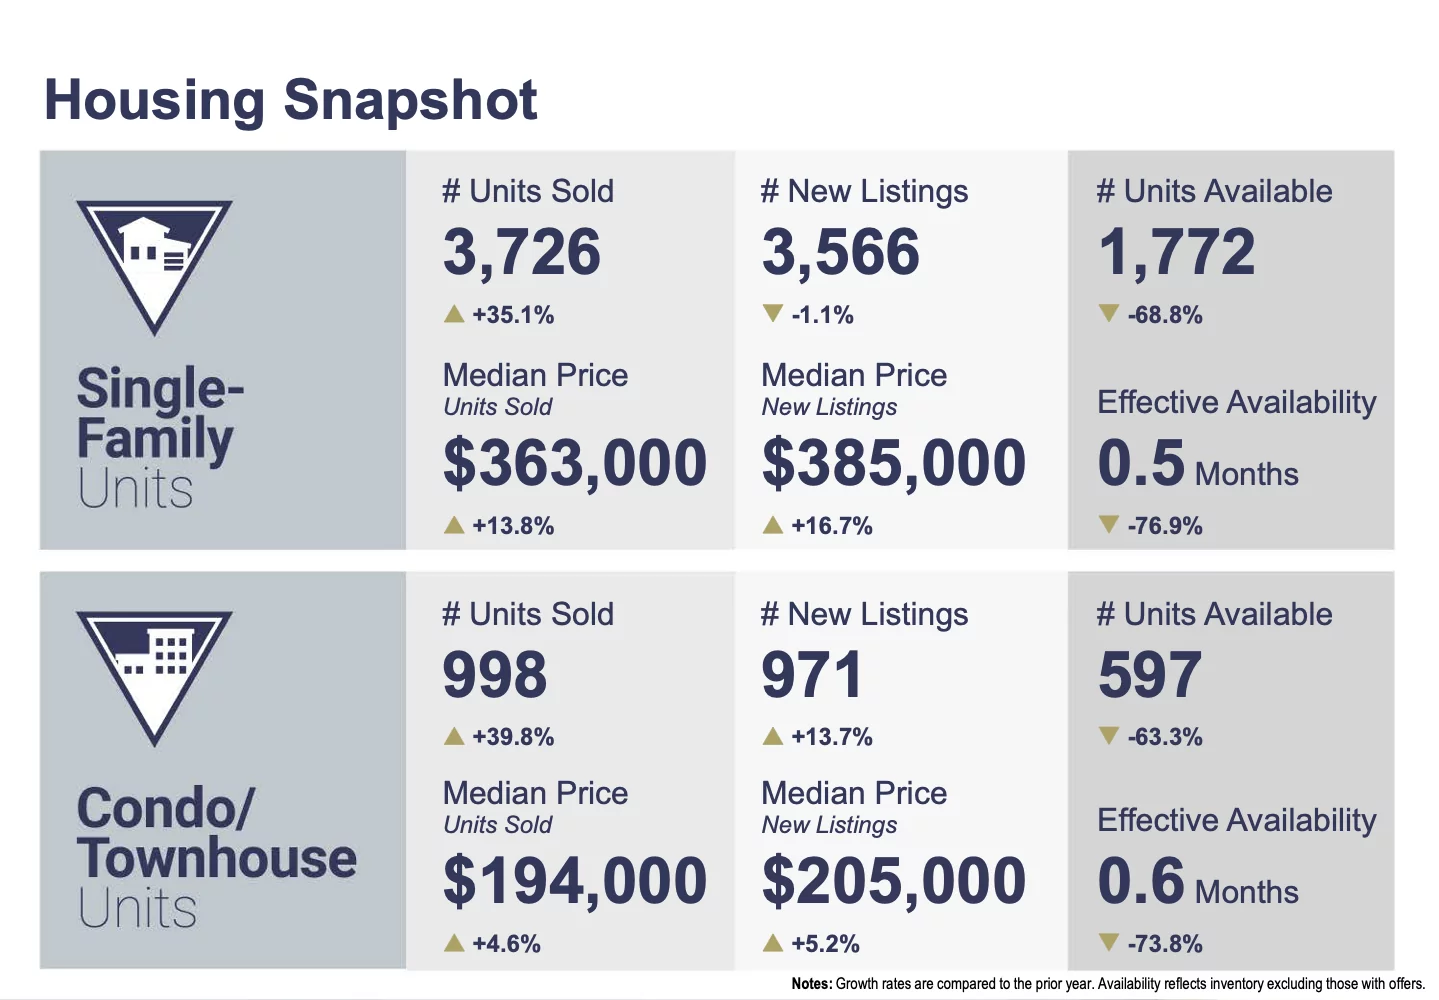 Snapshot of Housing Market as of March 2021